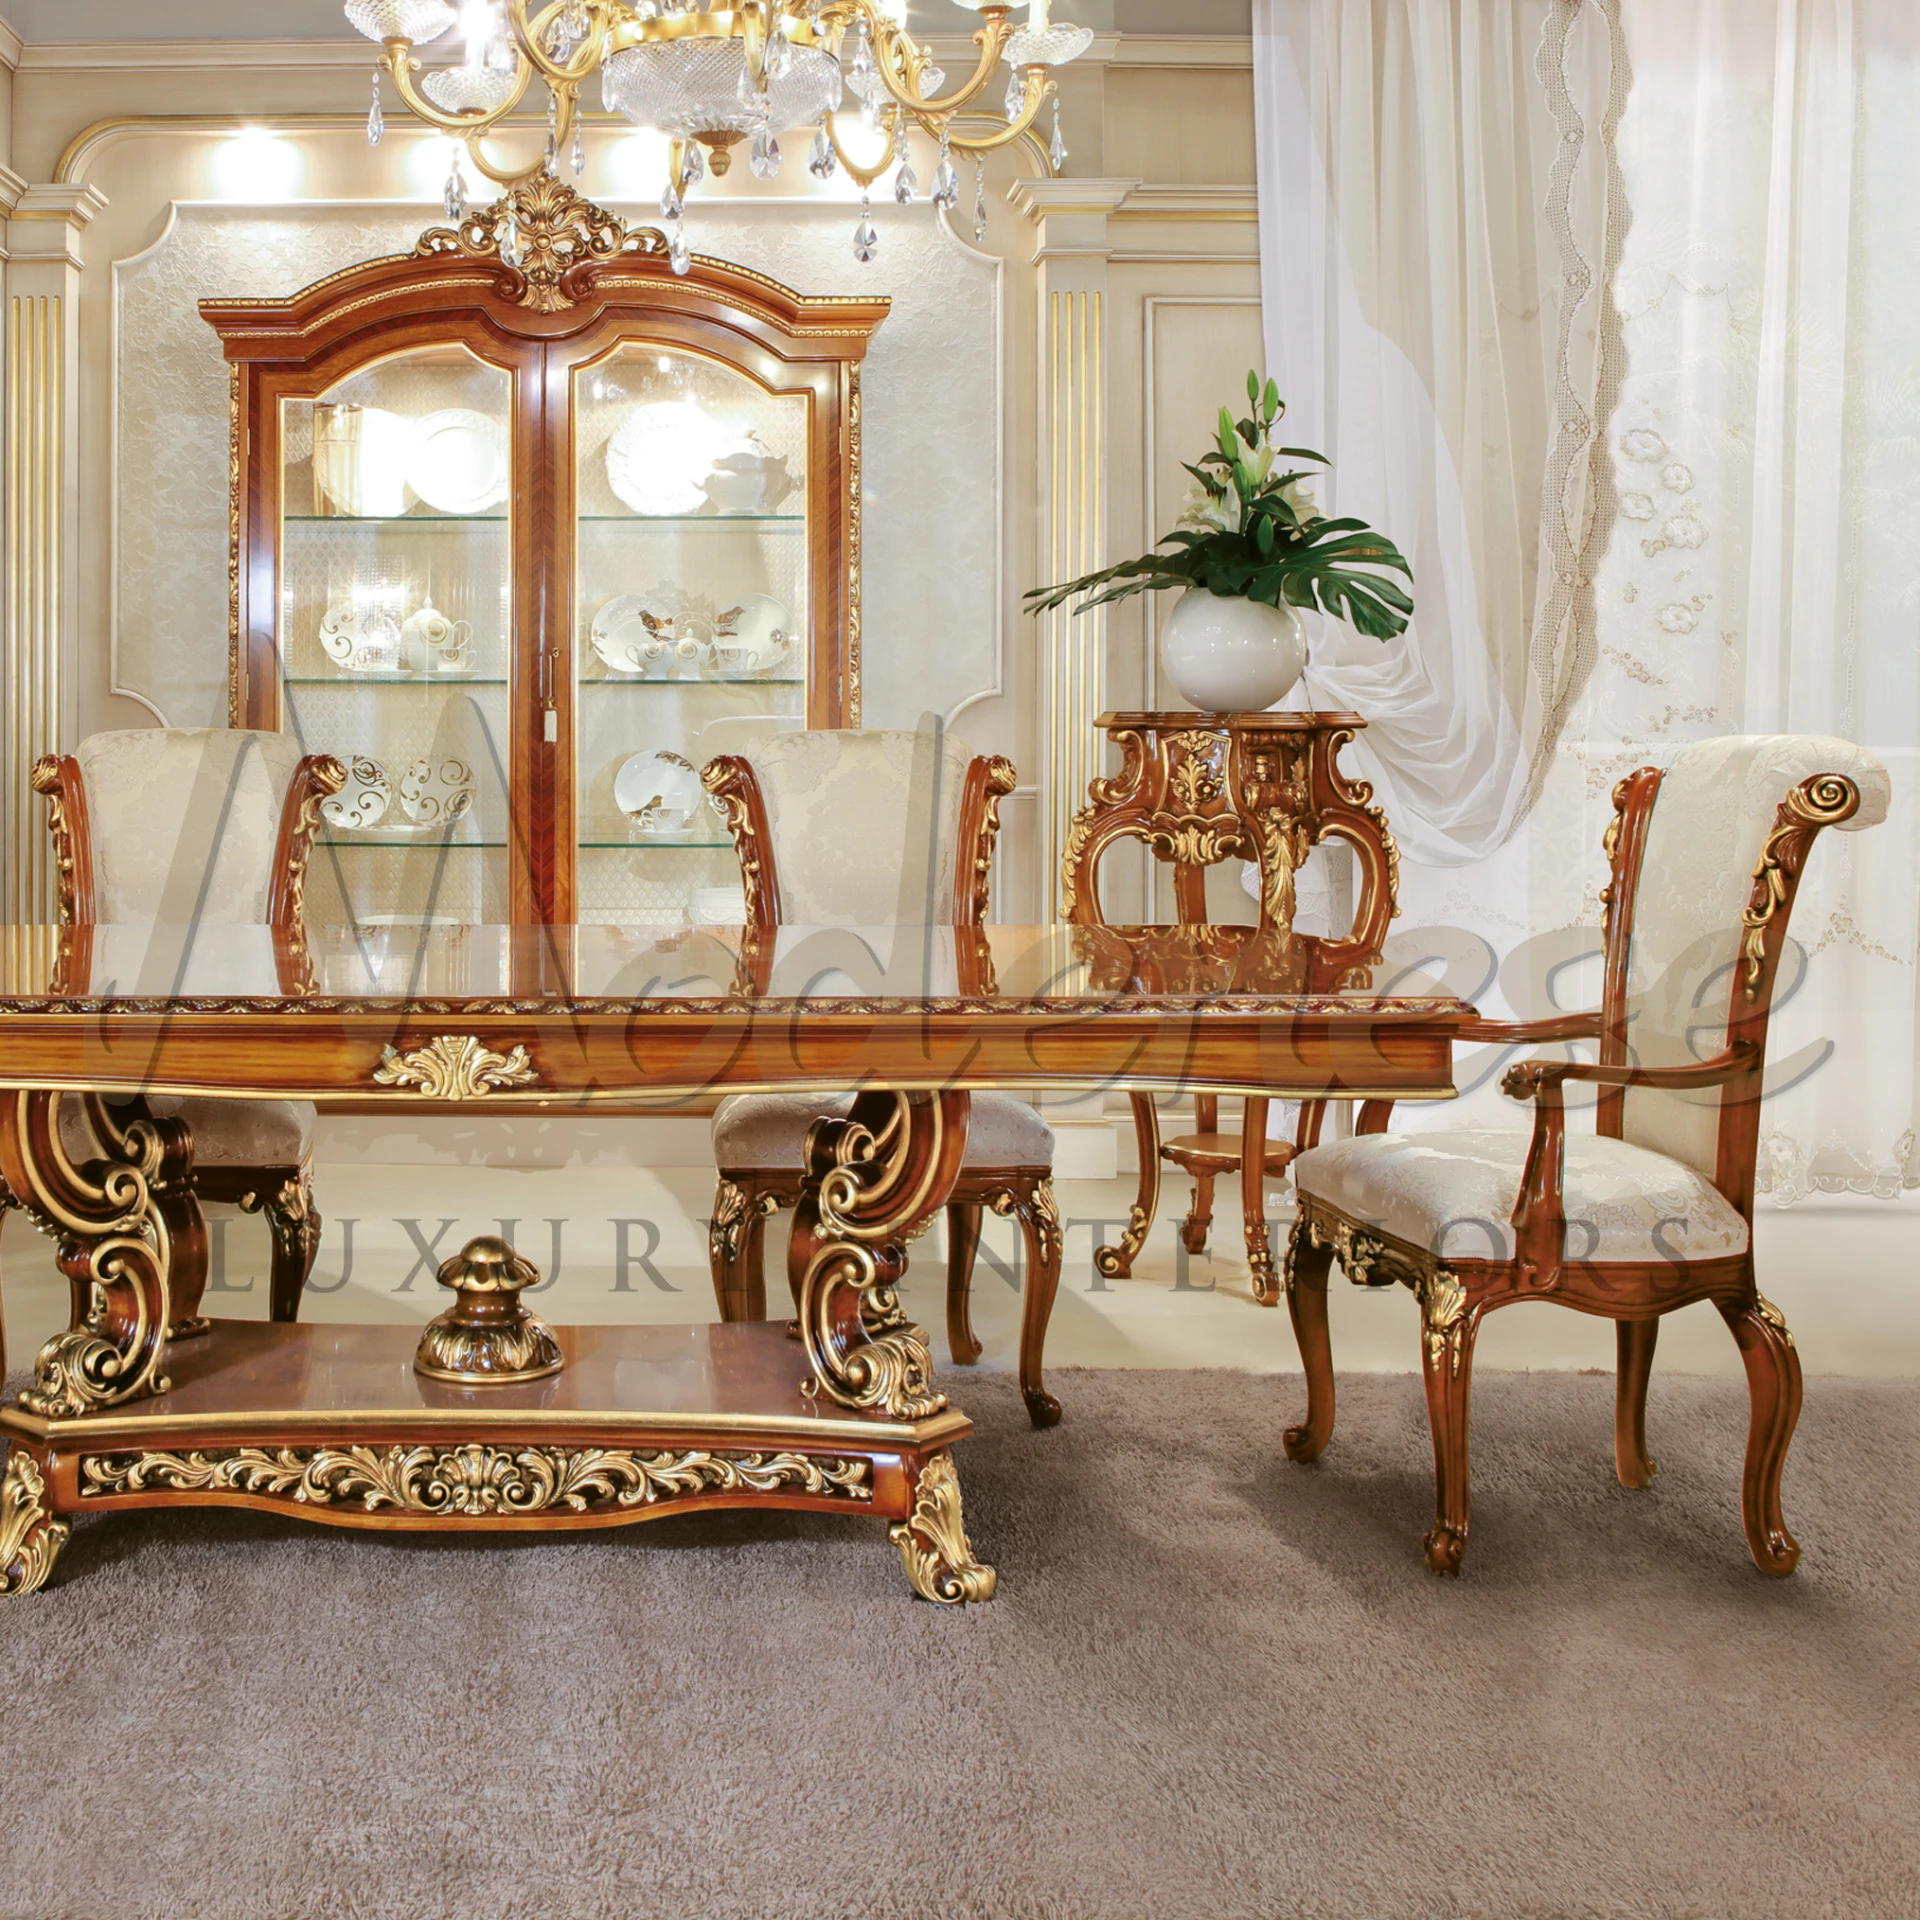 Lavish dining setting featuring a white and gold table and luxurious chairs.